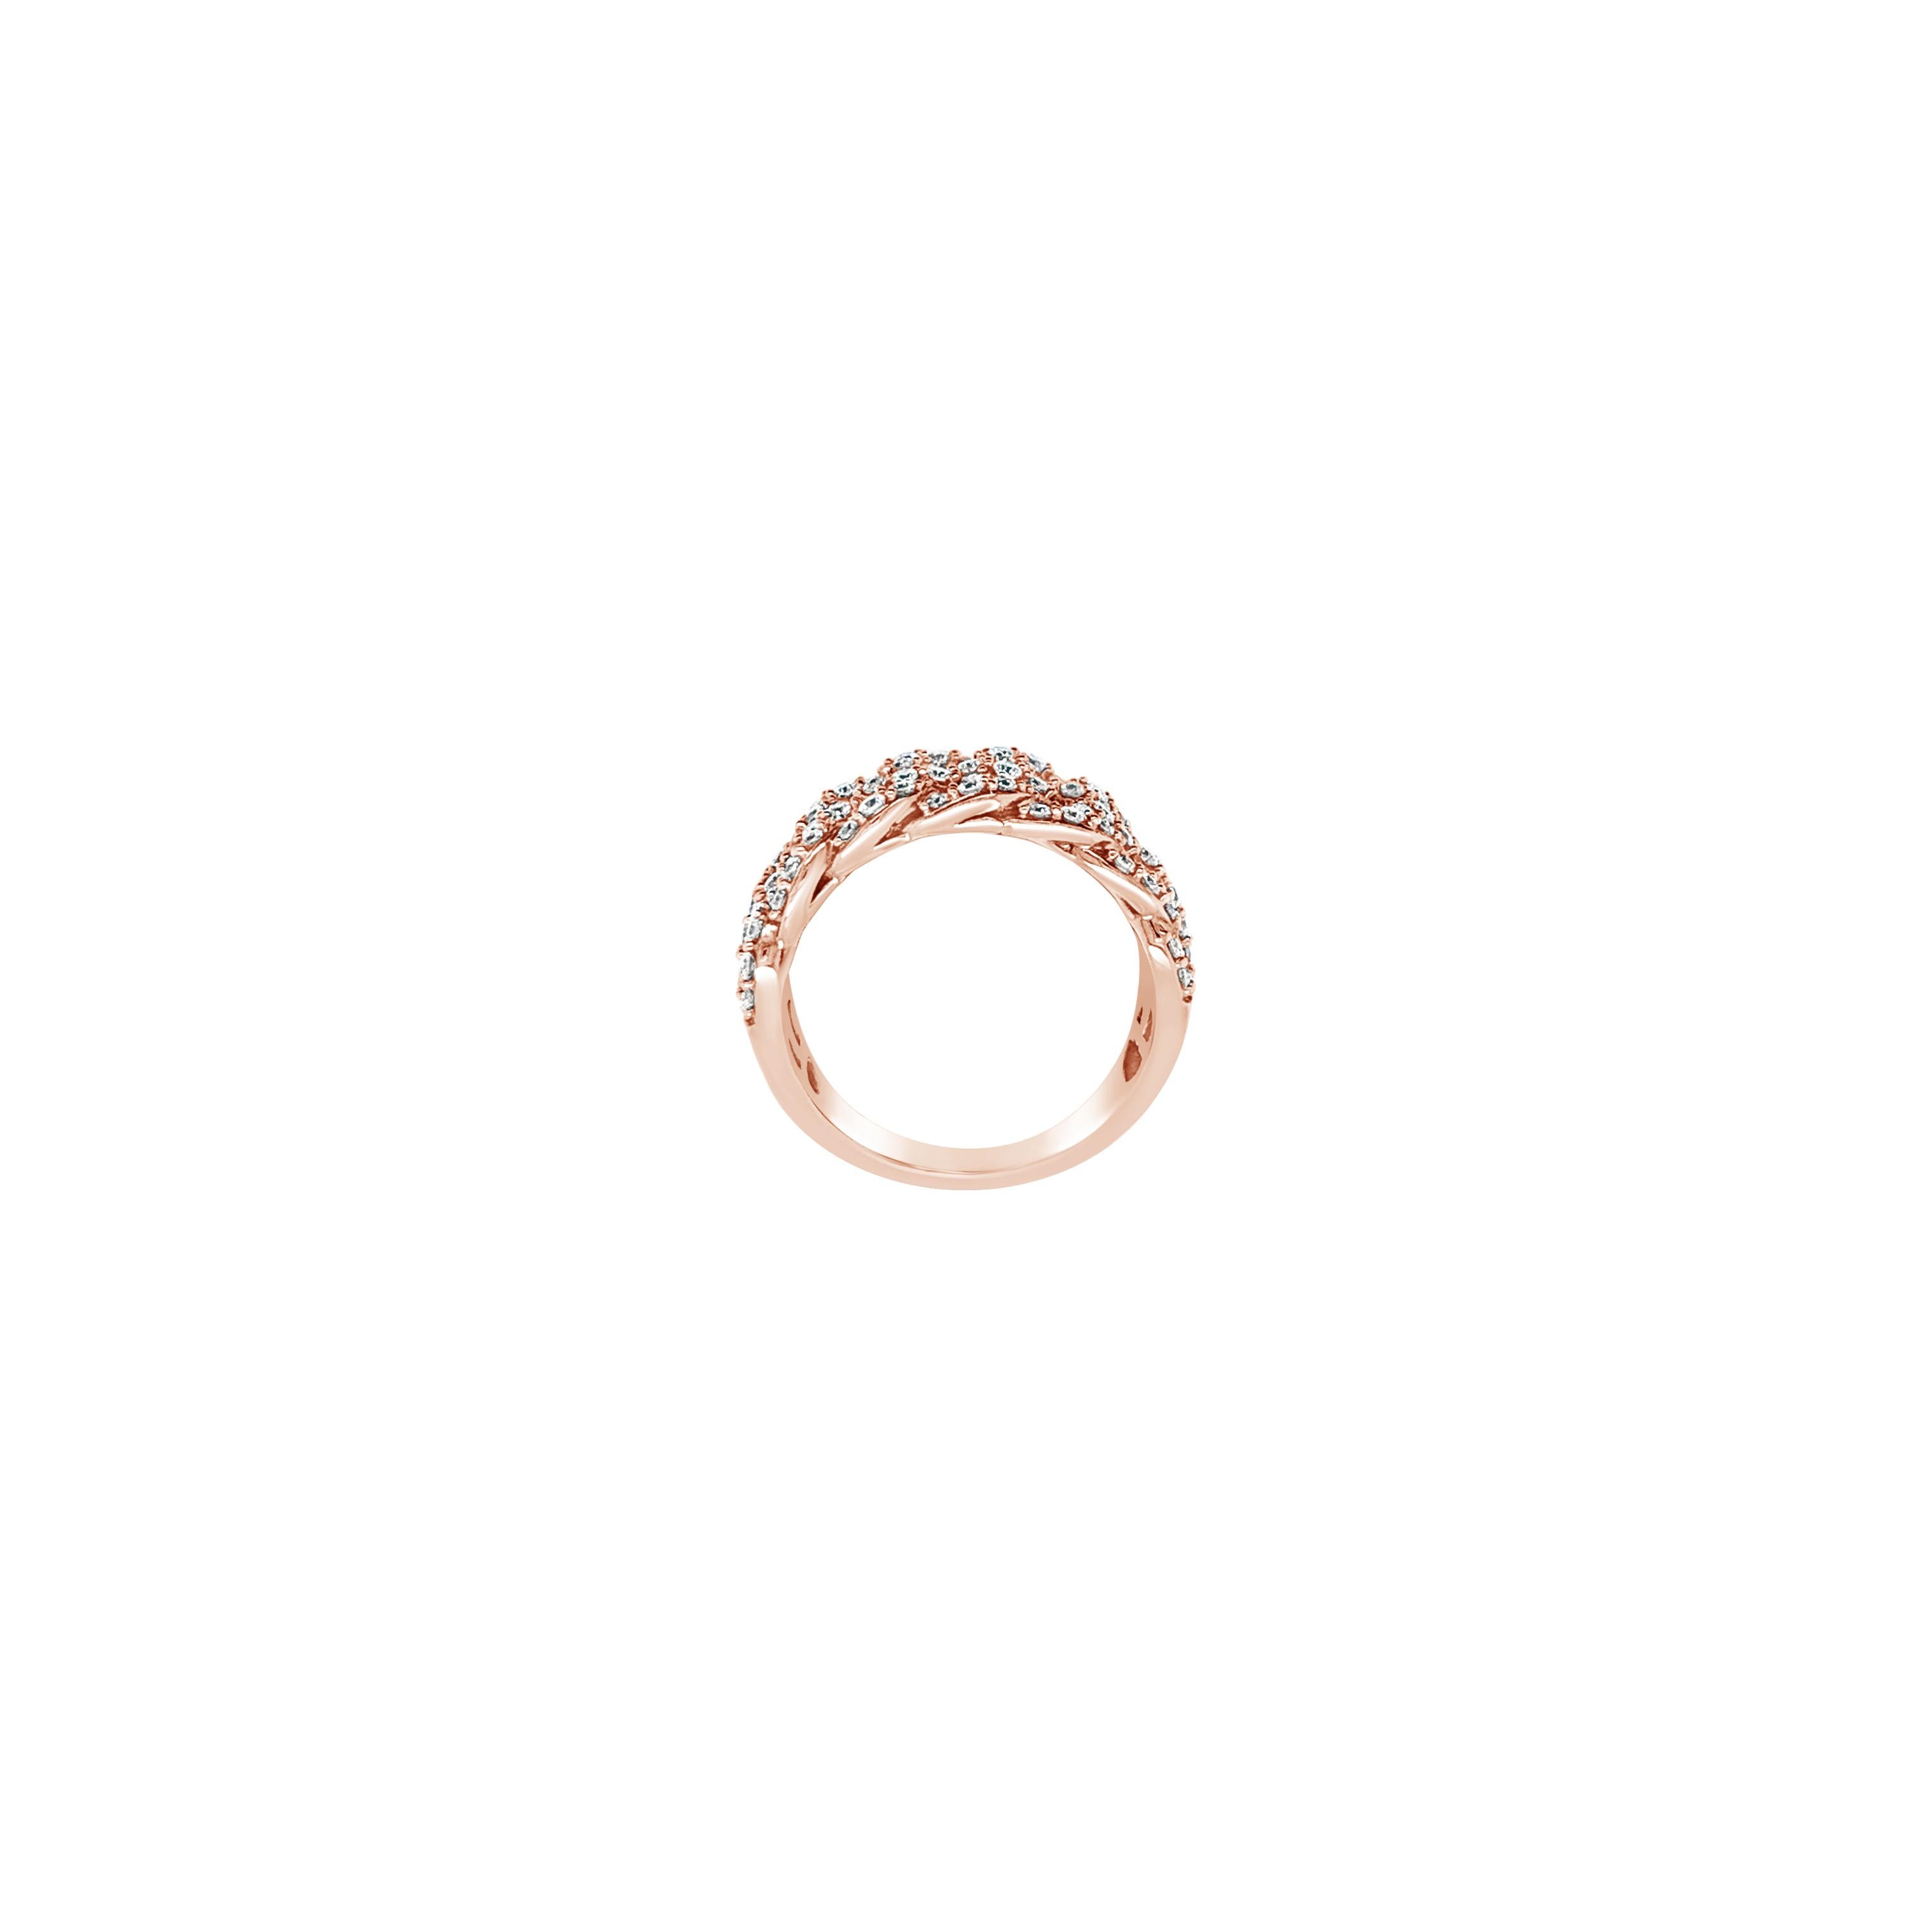 Le Vian® Ring featuring 1.29 cts. Vanilla Diamonds® set in 14K Strawberry Gold®

Diamonds Breakdown:
1.29 cts White Diamonds

Gems Breakdown:
None

Ring may or may not be sizable, please feel free to reach out with any questions!

Item comes with a